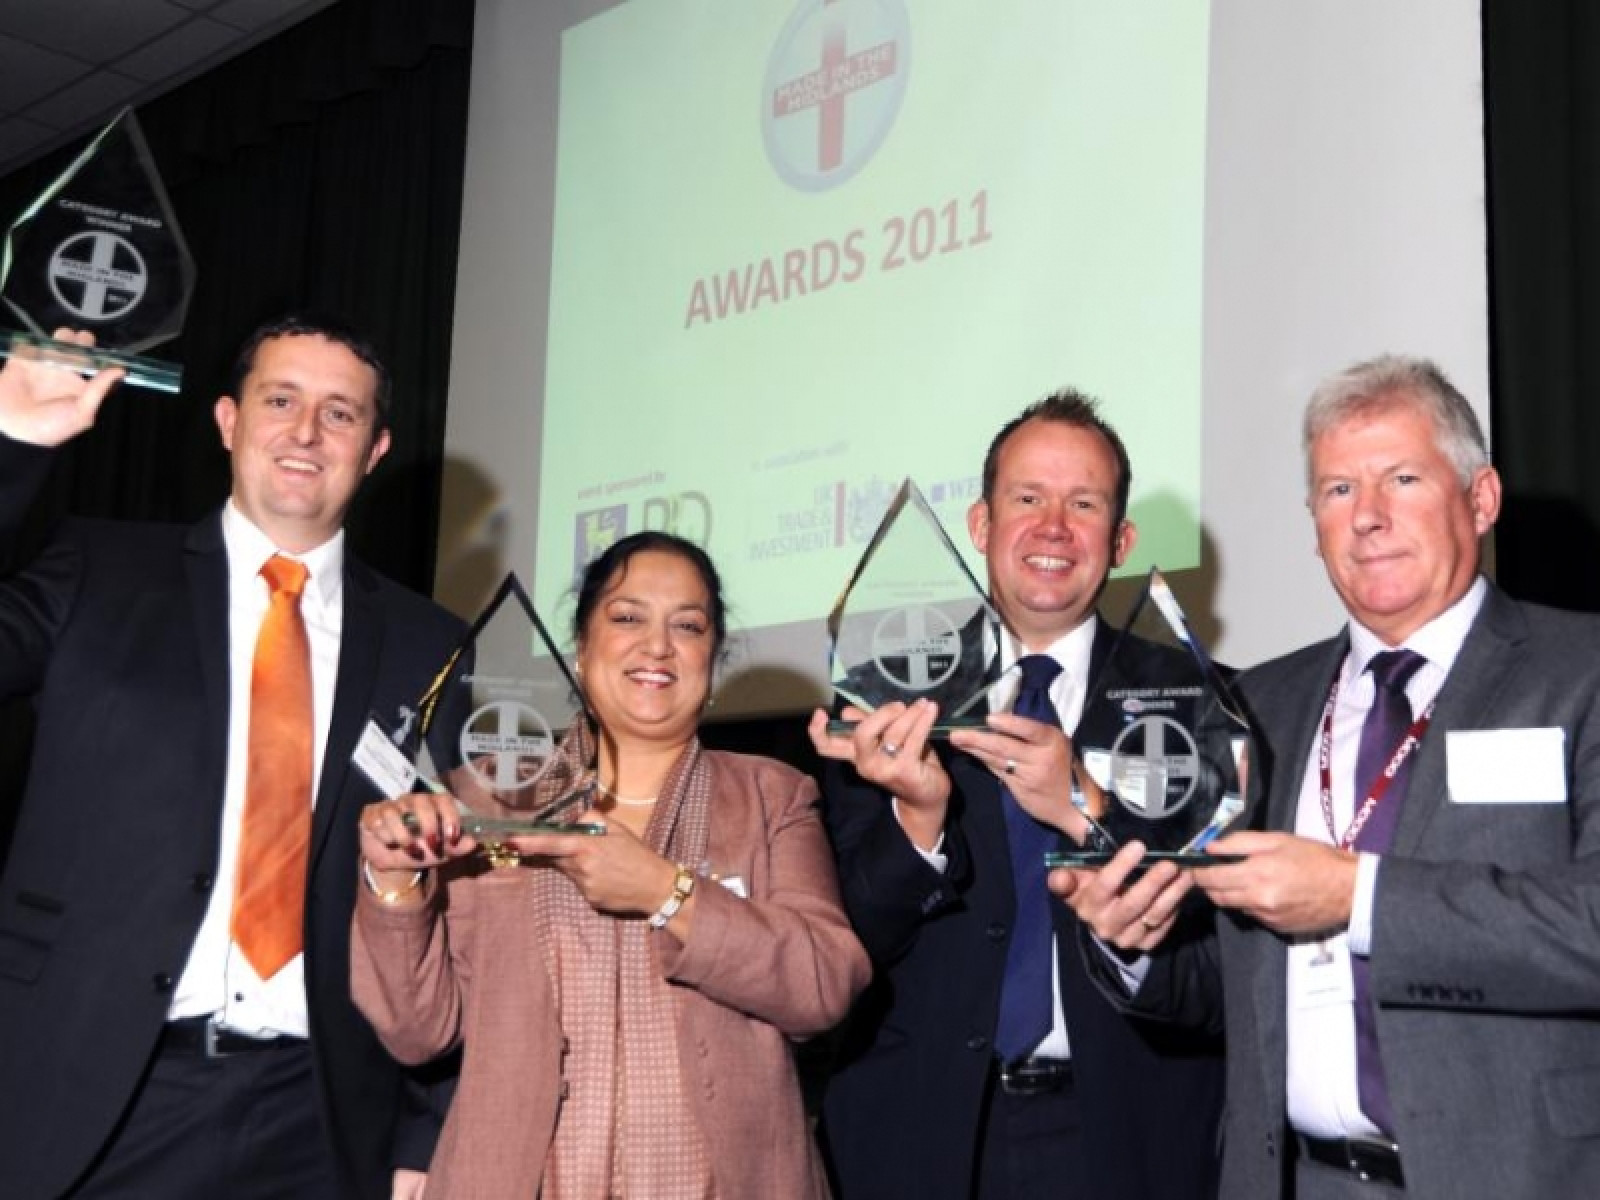 Made in the Midlands Awards 2011 Winners